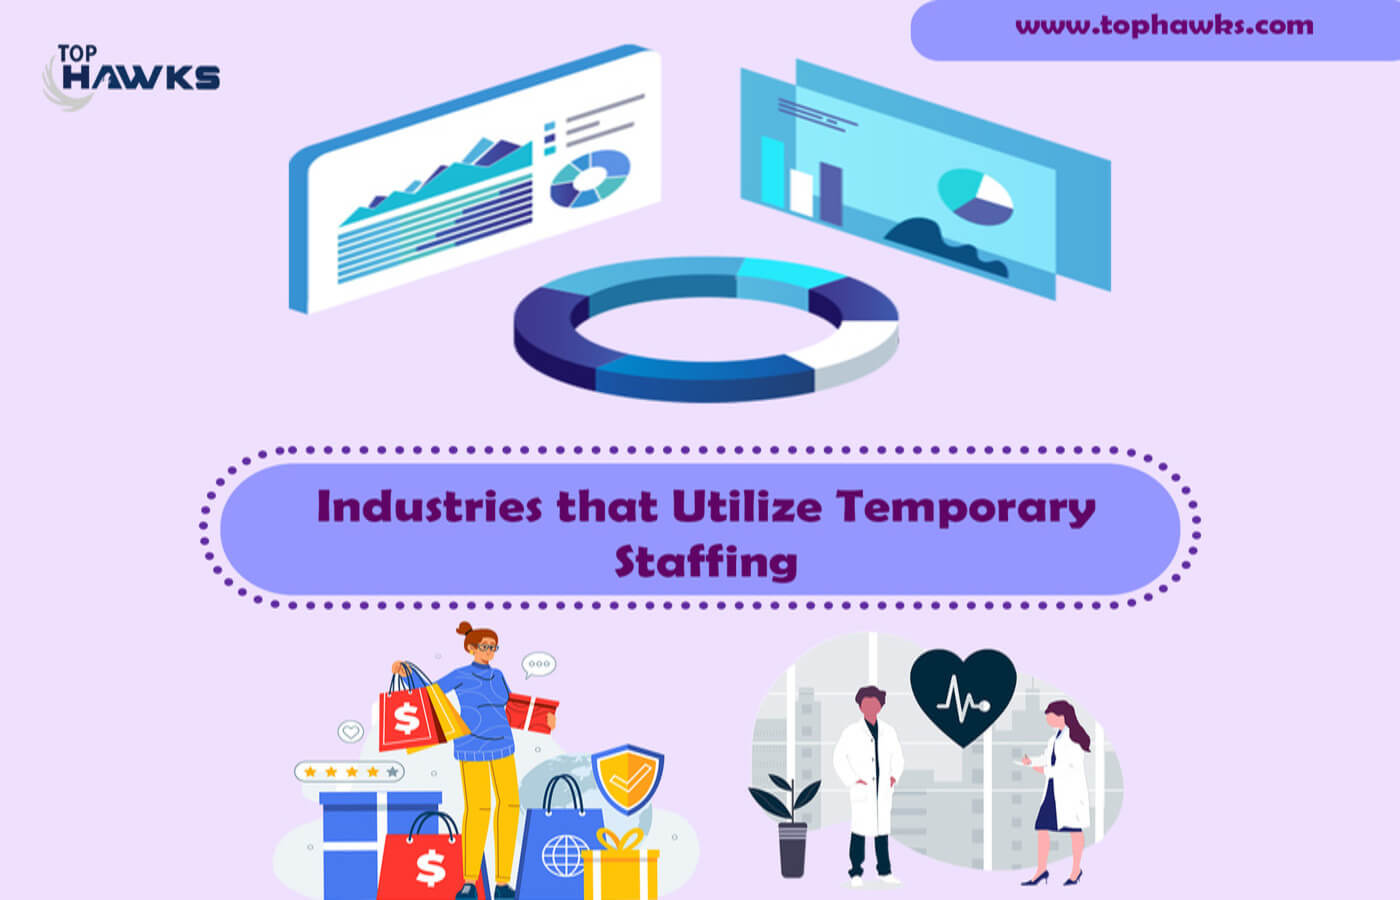 Image depicting Industries that Utilize Temporary Staffing